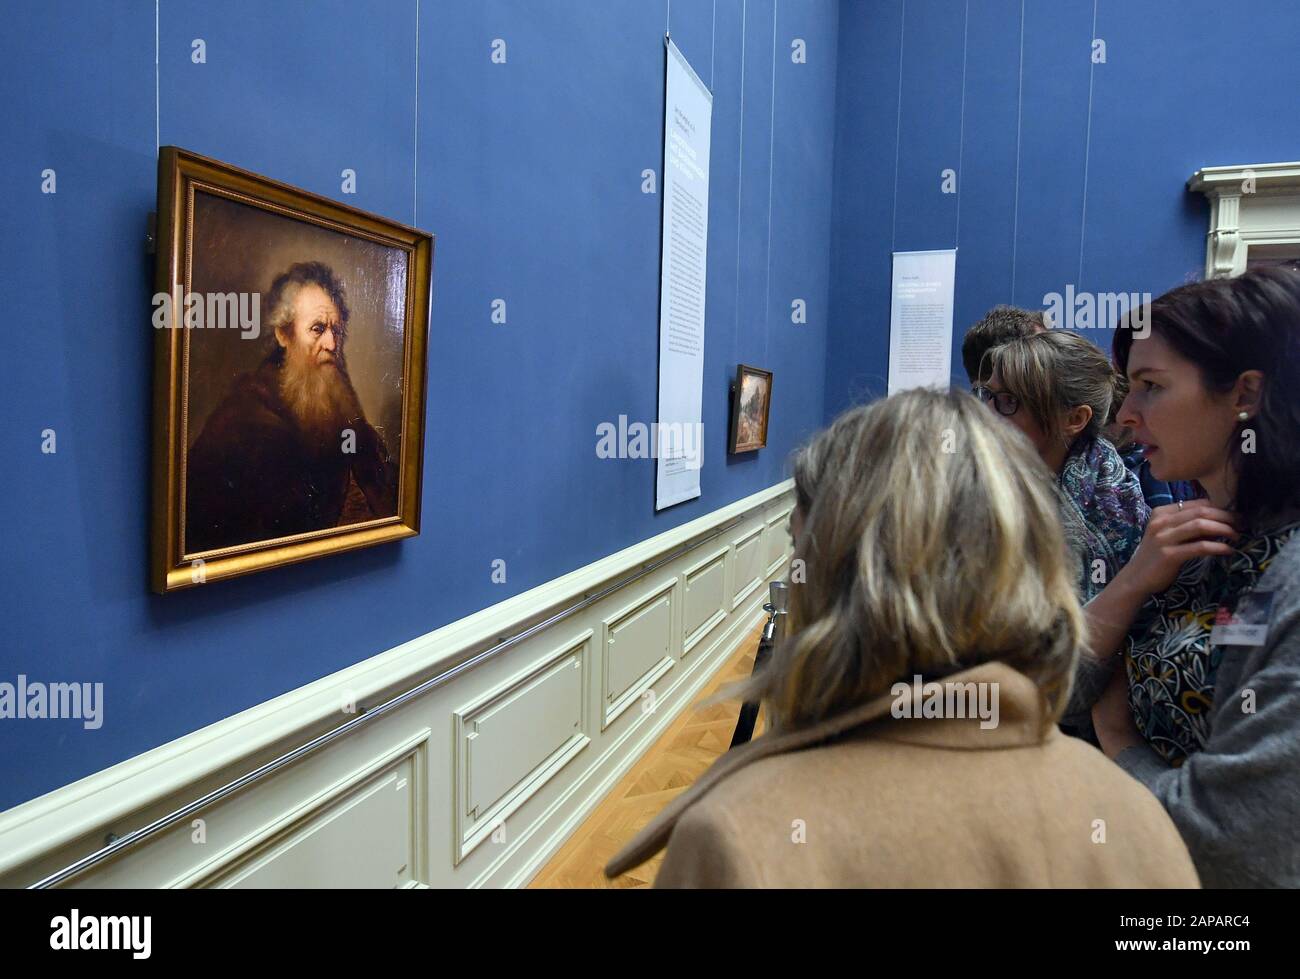 20 January 2020, Thuringia, Gotha: Visitors look at the painting 'Old Man' by Jan Lievens (1607-1674). After their theft about 40 years ago, five top-class paintings are being shown again in Gotha. The pictures were considered lost after the mysterious theft in 1979. In 2018 they were offered for sale through a lawyer of the Stiftung Schloss Friedenstein. In September 2019 the works were finally handed over. Now, after completion of investigations into their authenticity and condition, they can be seen for a week. Photo: Martin Schutt/dpa-Zentralbild/ZB Stock Photo